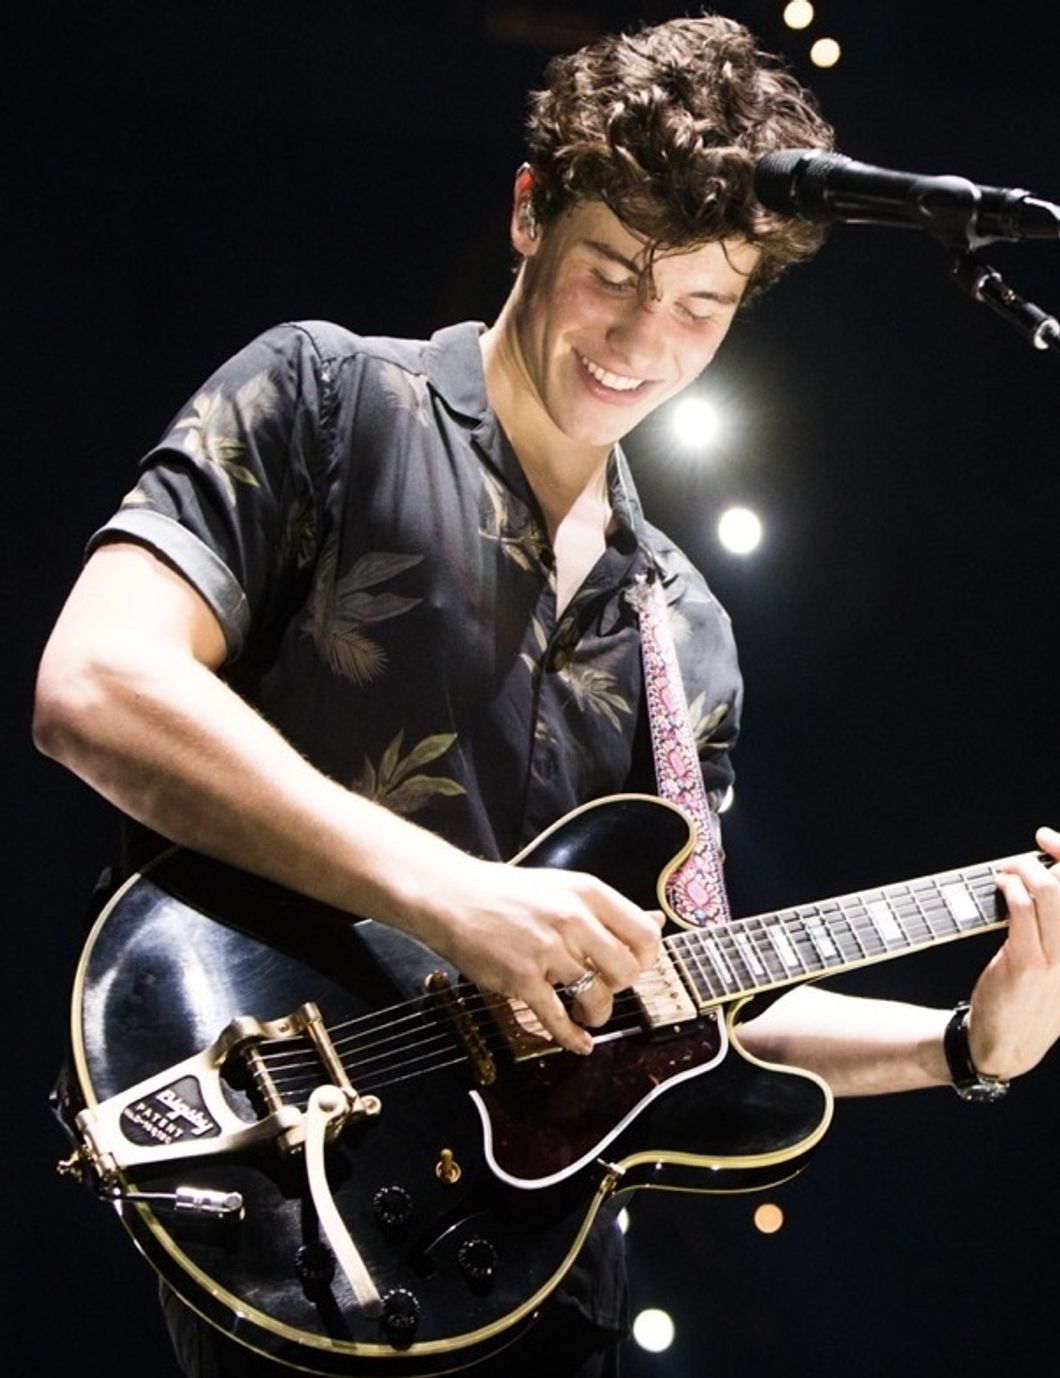 The 'Shawn Mendes' Album Should Be On Your Playlist